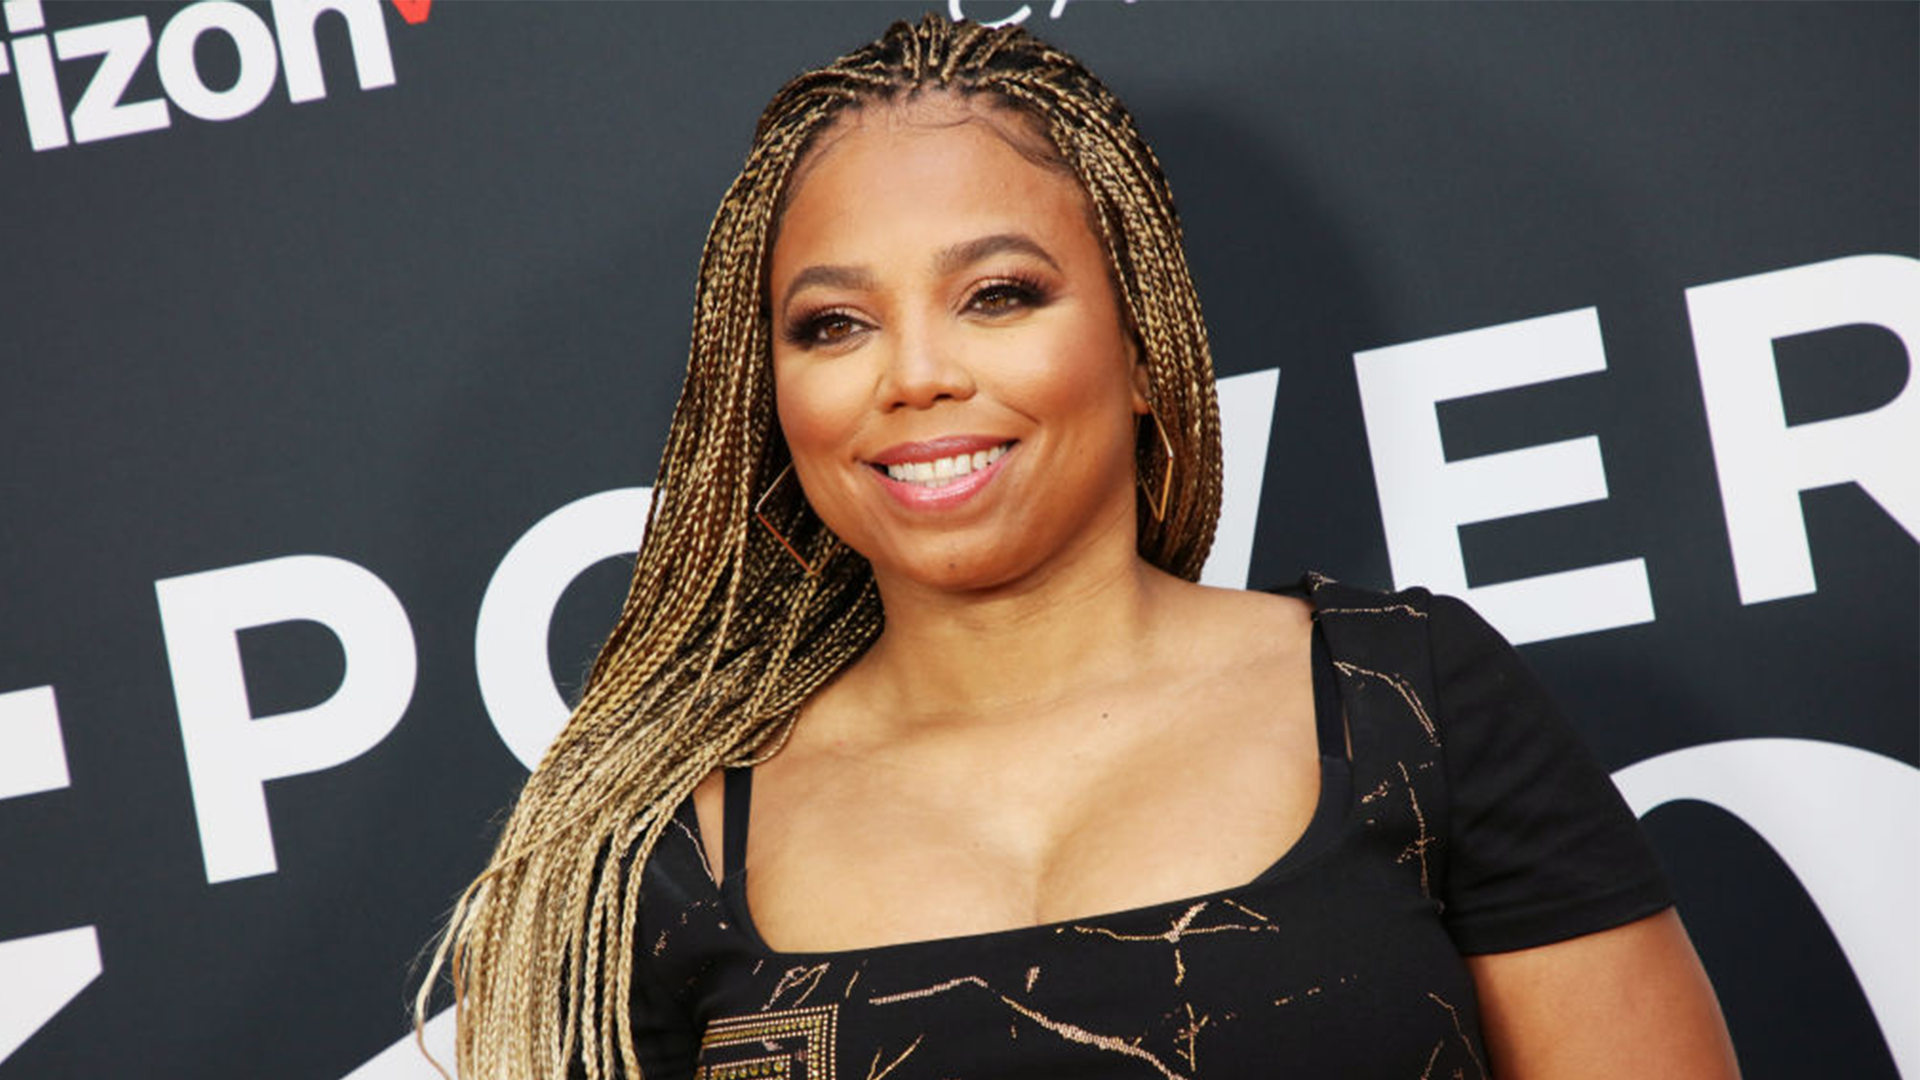 Jemele Hill Recalls Being Paid $200K Less Than ESPN Co-Host While 'Doing The Same Job'